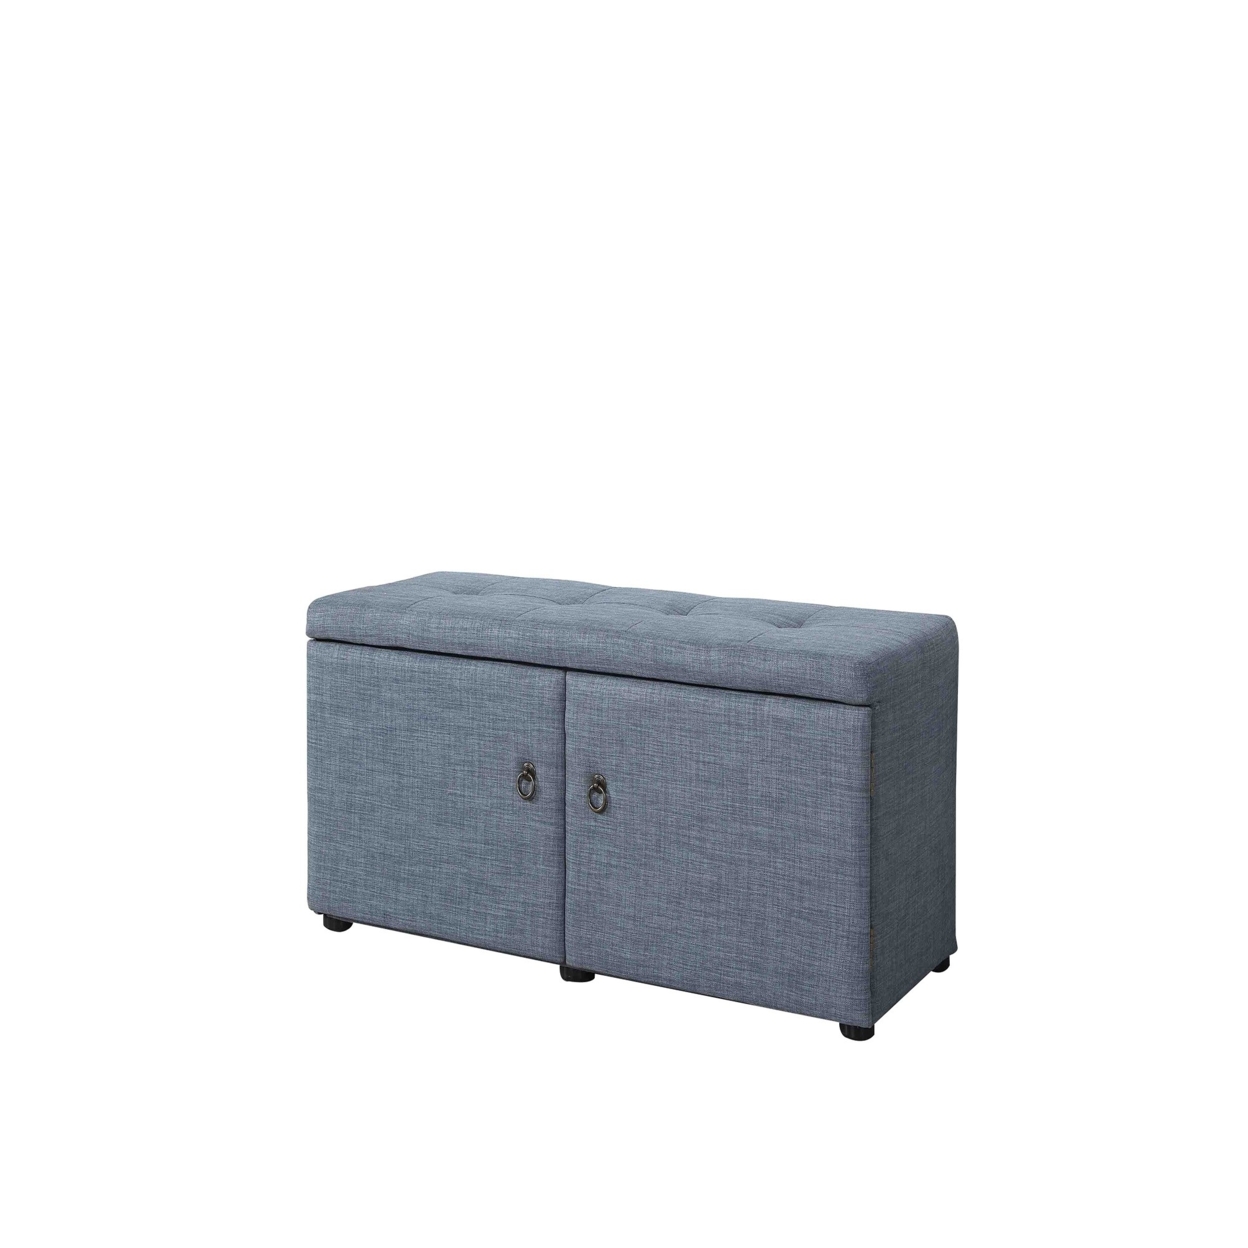 Fabric Upholstered Shoe Storage Bench With Button Tufted Seating, Blue- Saltoro Sherpi